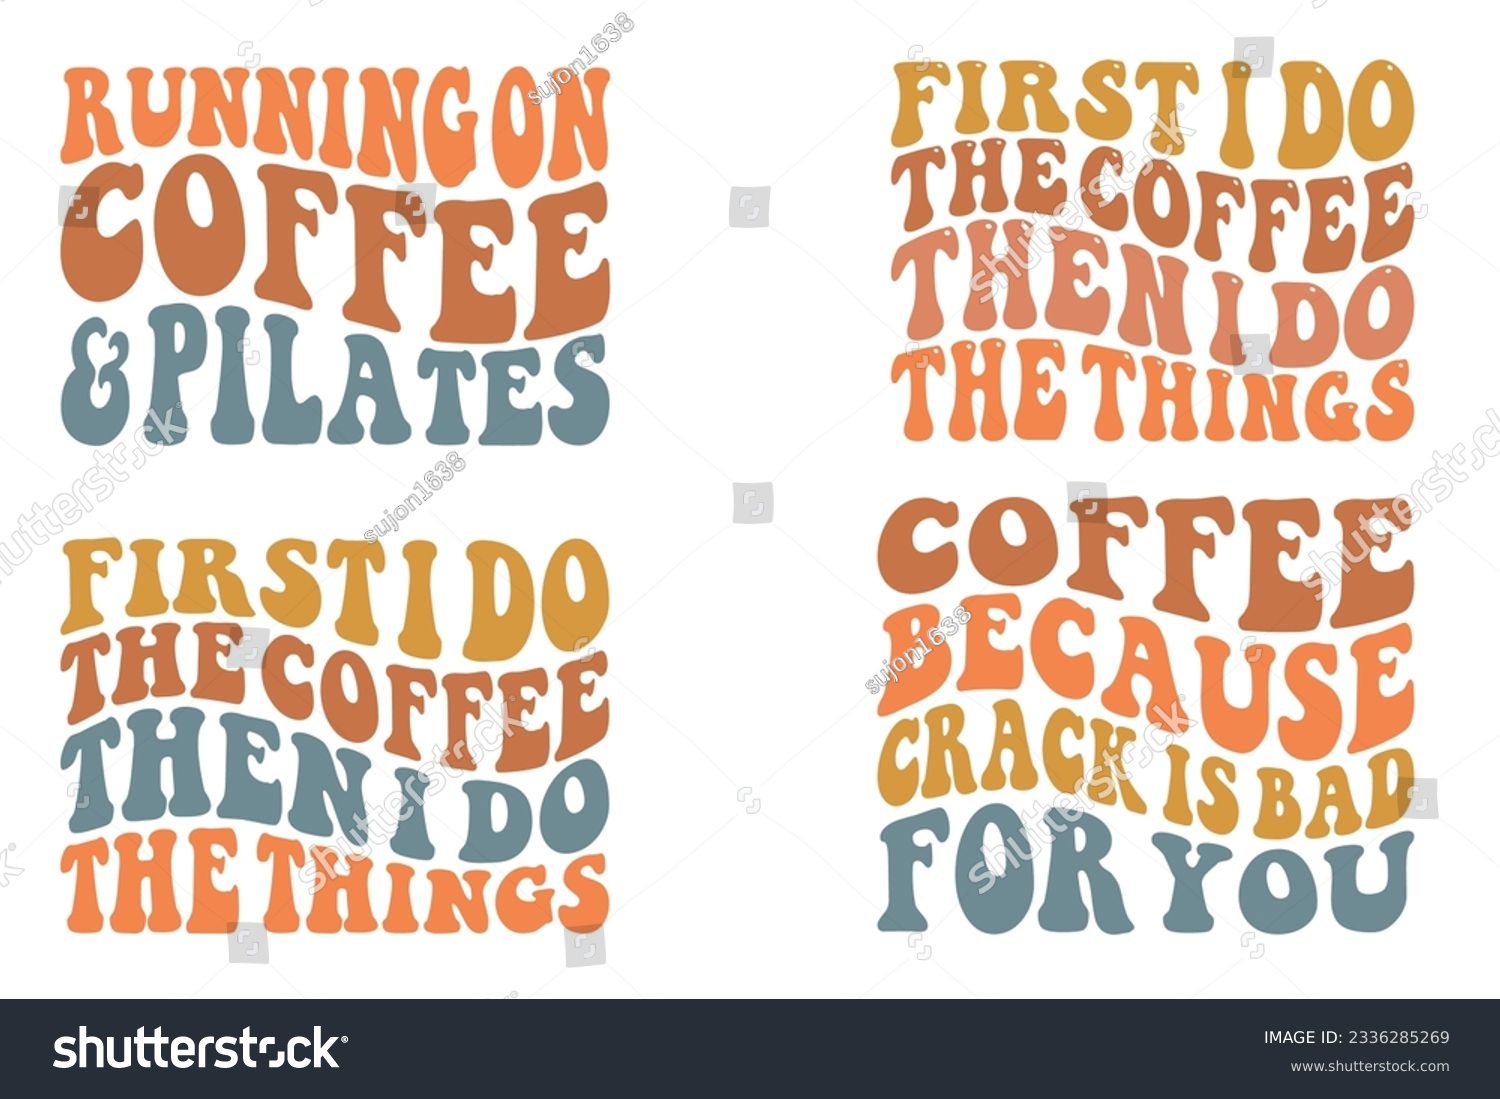 SVG of  Running on Coffee and Pilates, First I do the coffee then I do the things, Coffee because crack is bad for you retro wavy SVG bundle T-shirt svg